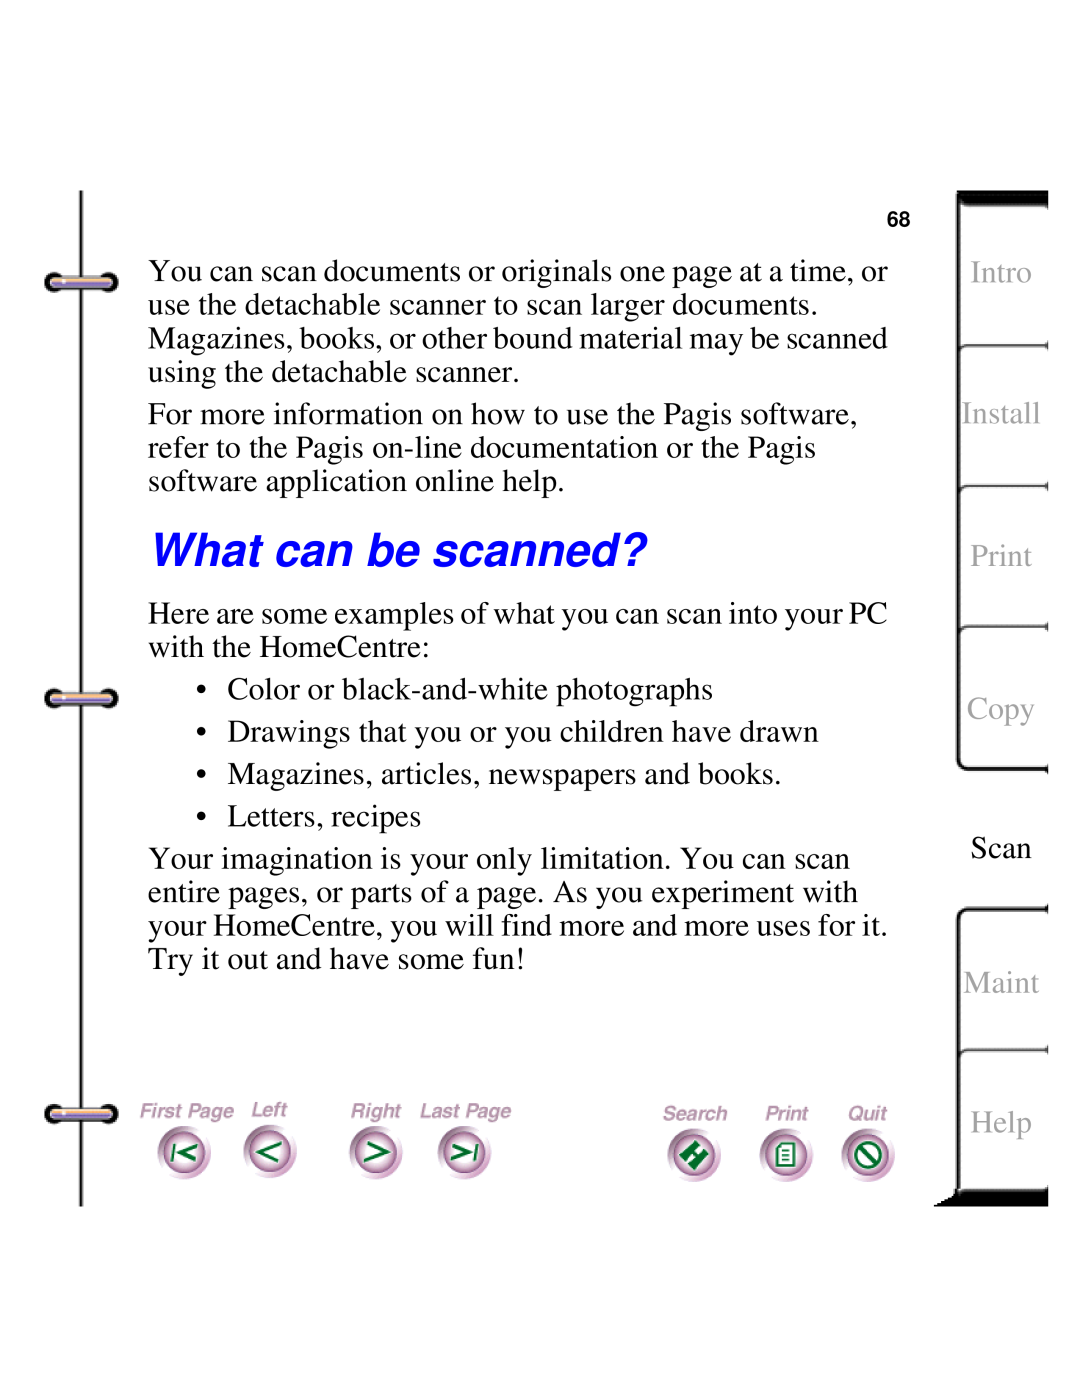 Xerox Document HomeCentre manual What can be scanned?, Intro Install Print Copy, Maint, Help 